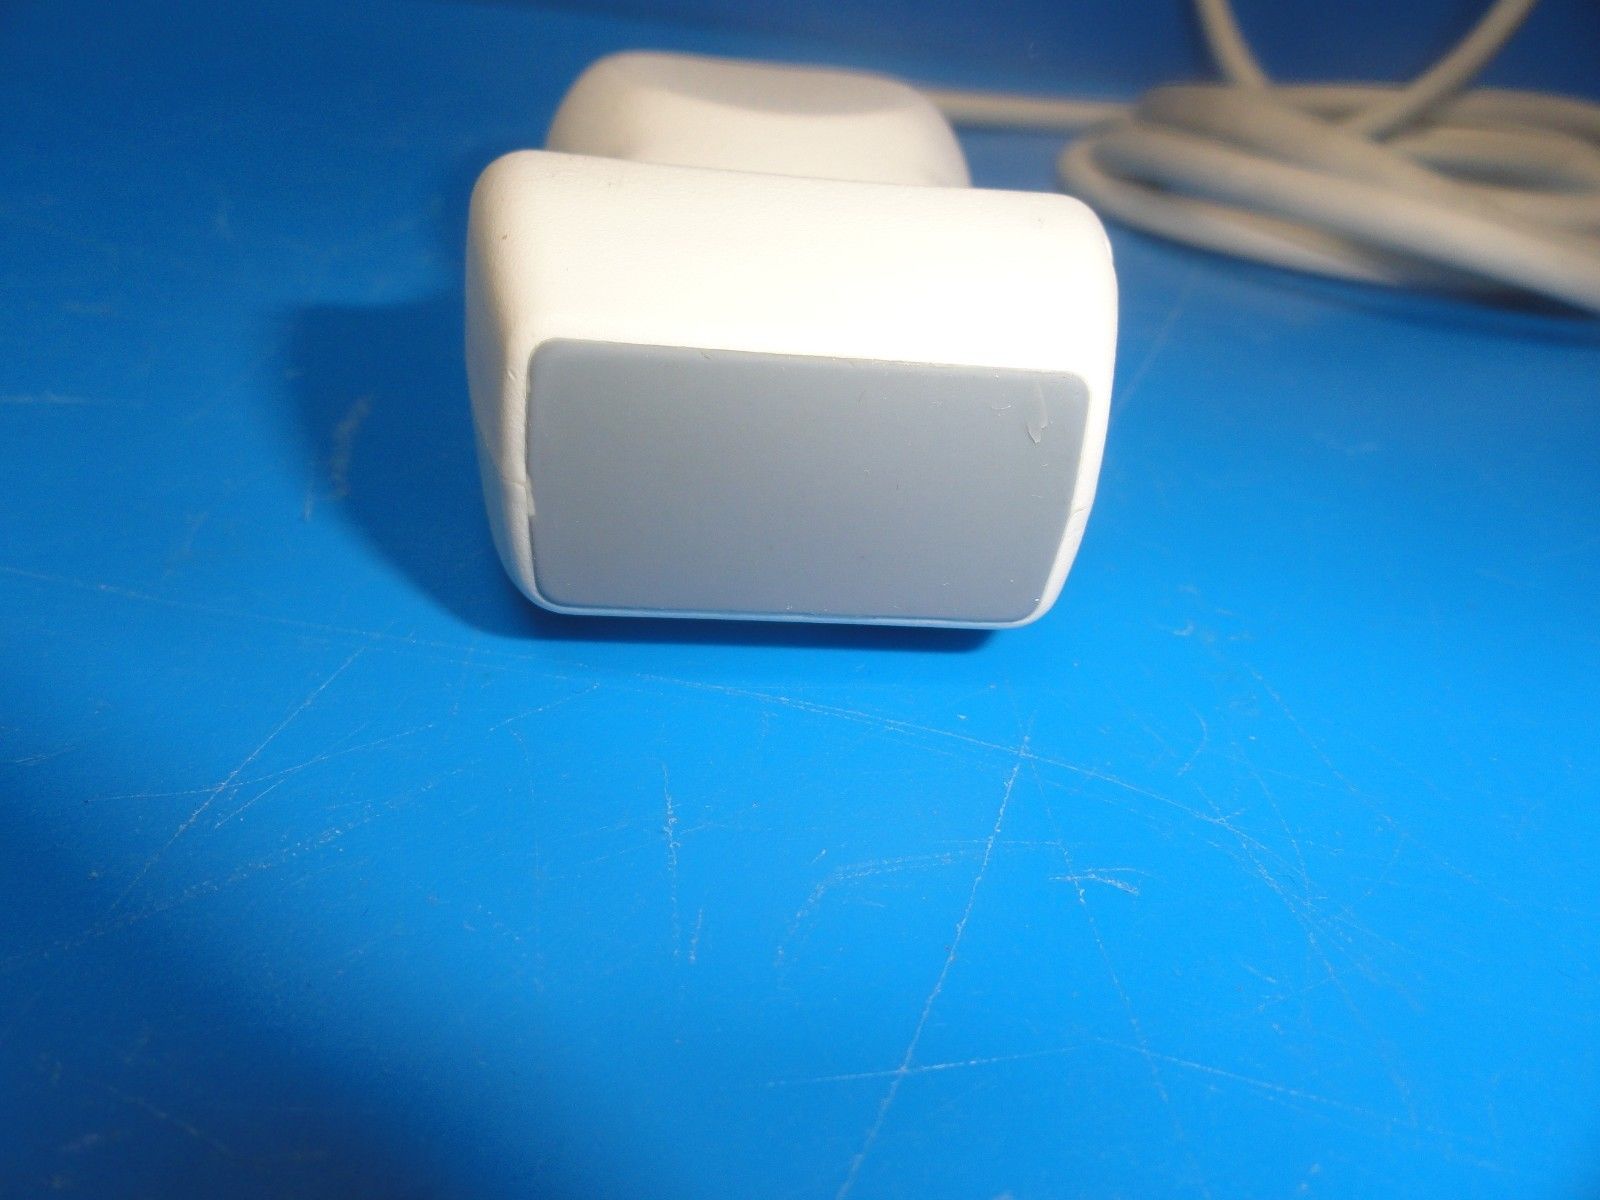 a white object sitting on top of a blue table